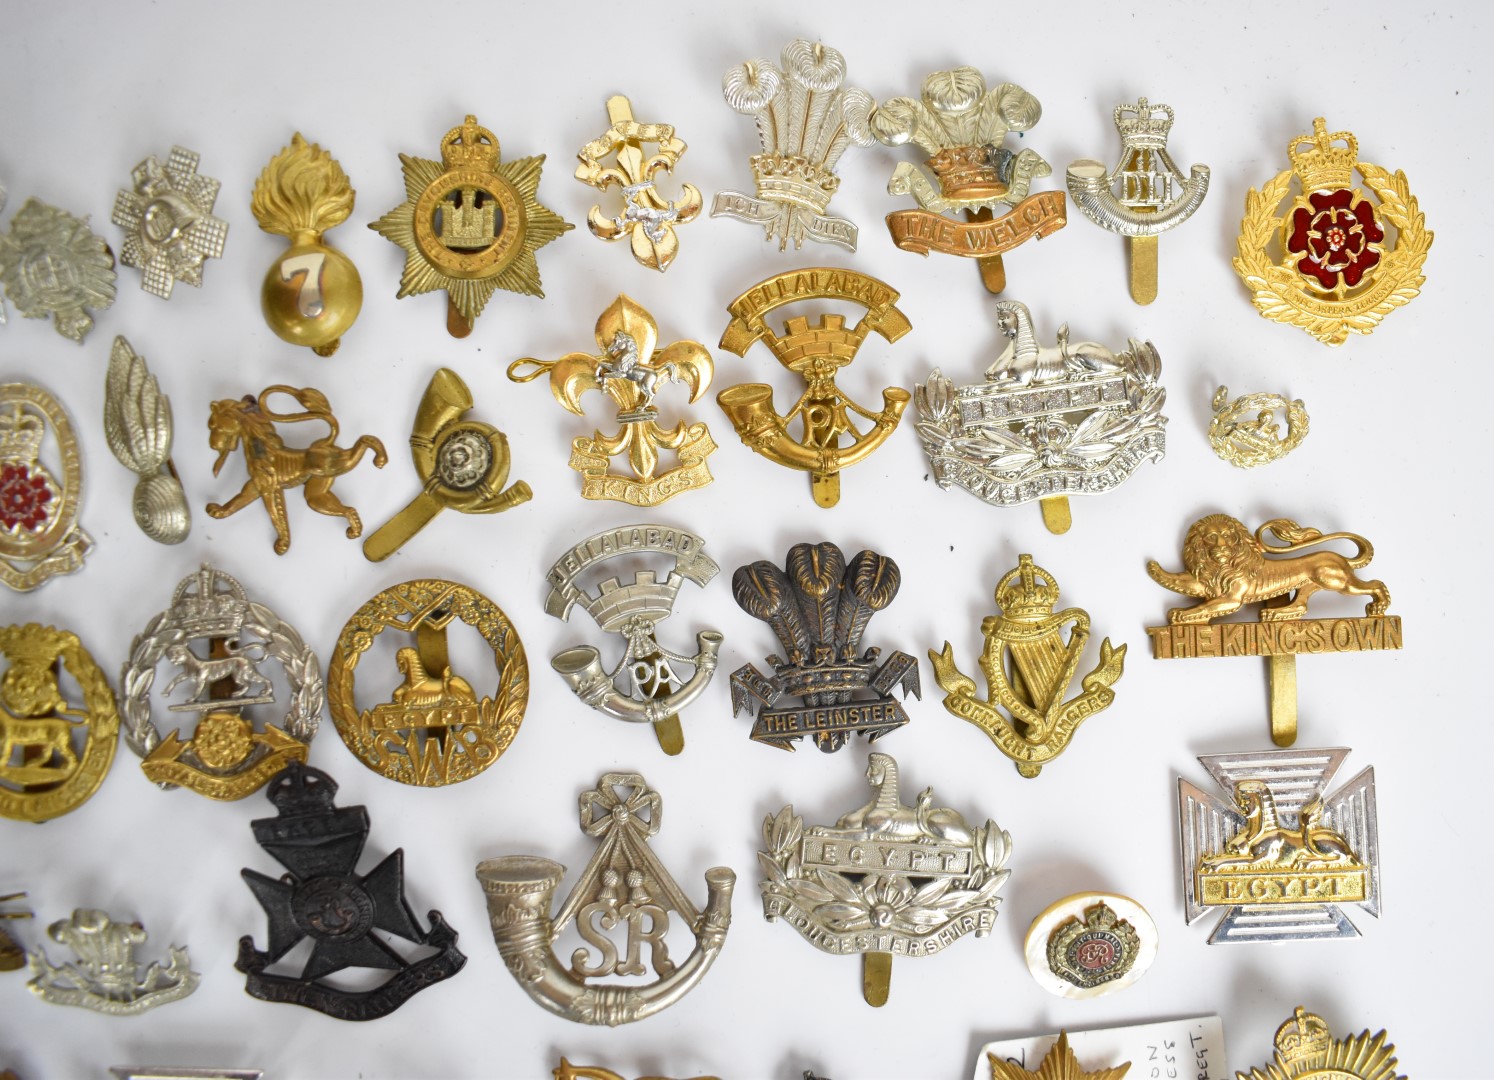 Large collection of approximately 100 British Army cap badges including Royal Sussex Regiment, - Image 7 of 14